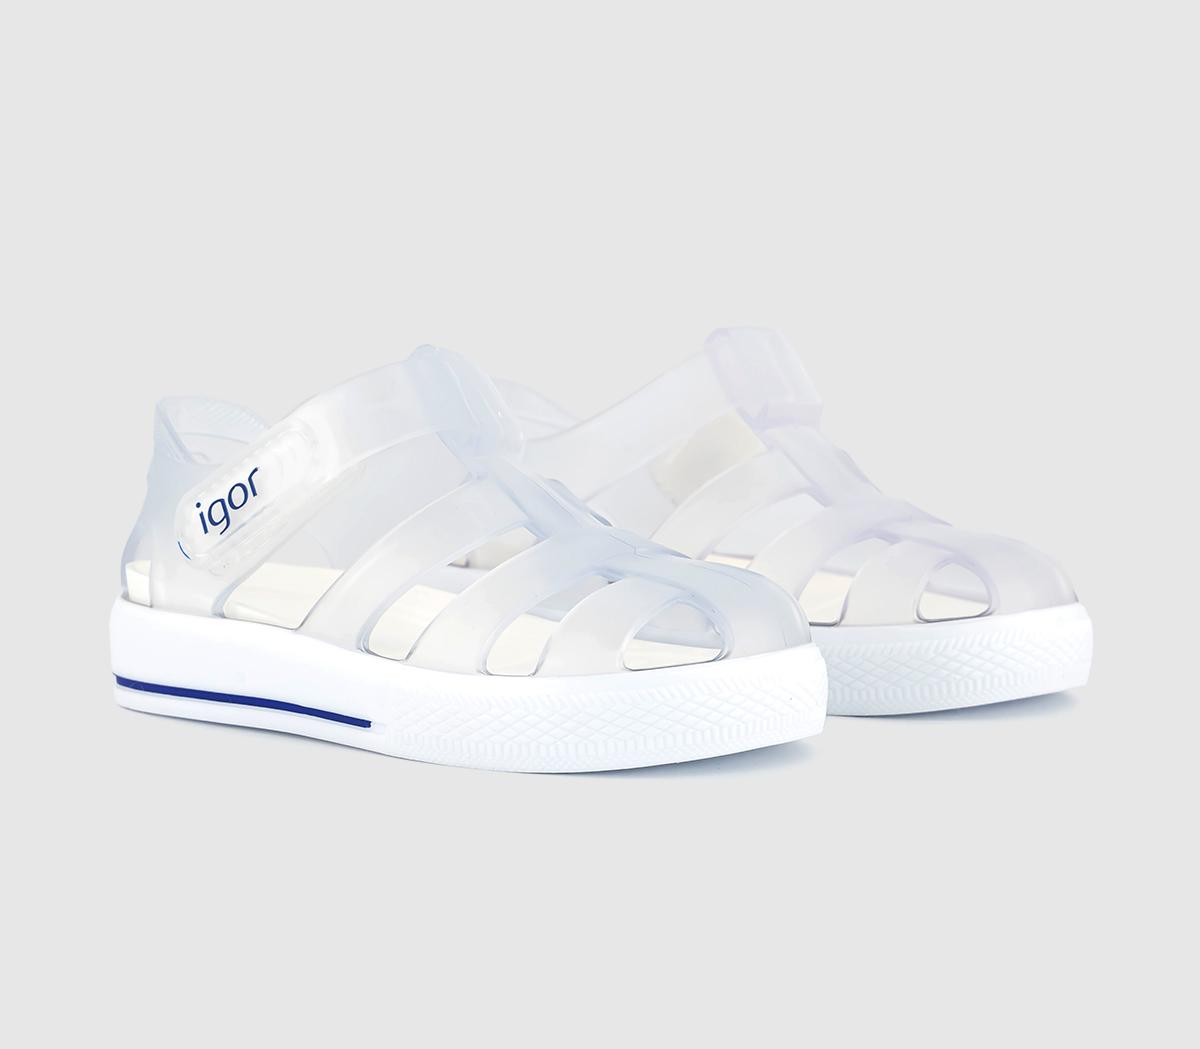 Igor Kids Clear White Star Summer Sandals, Perfect For The Hot Sand Or Poolside, Size: 5 Infant